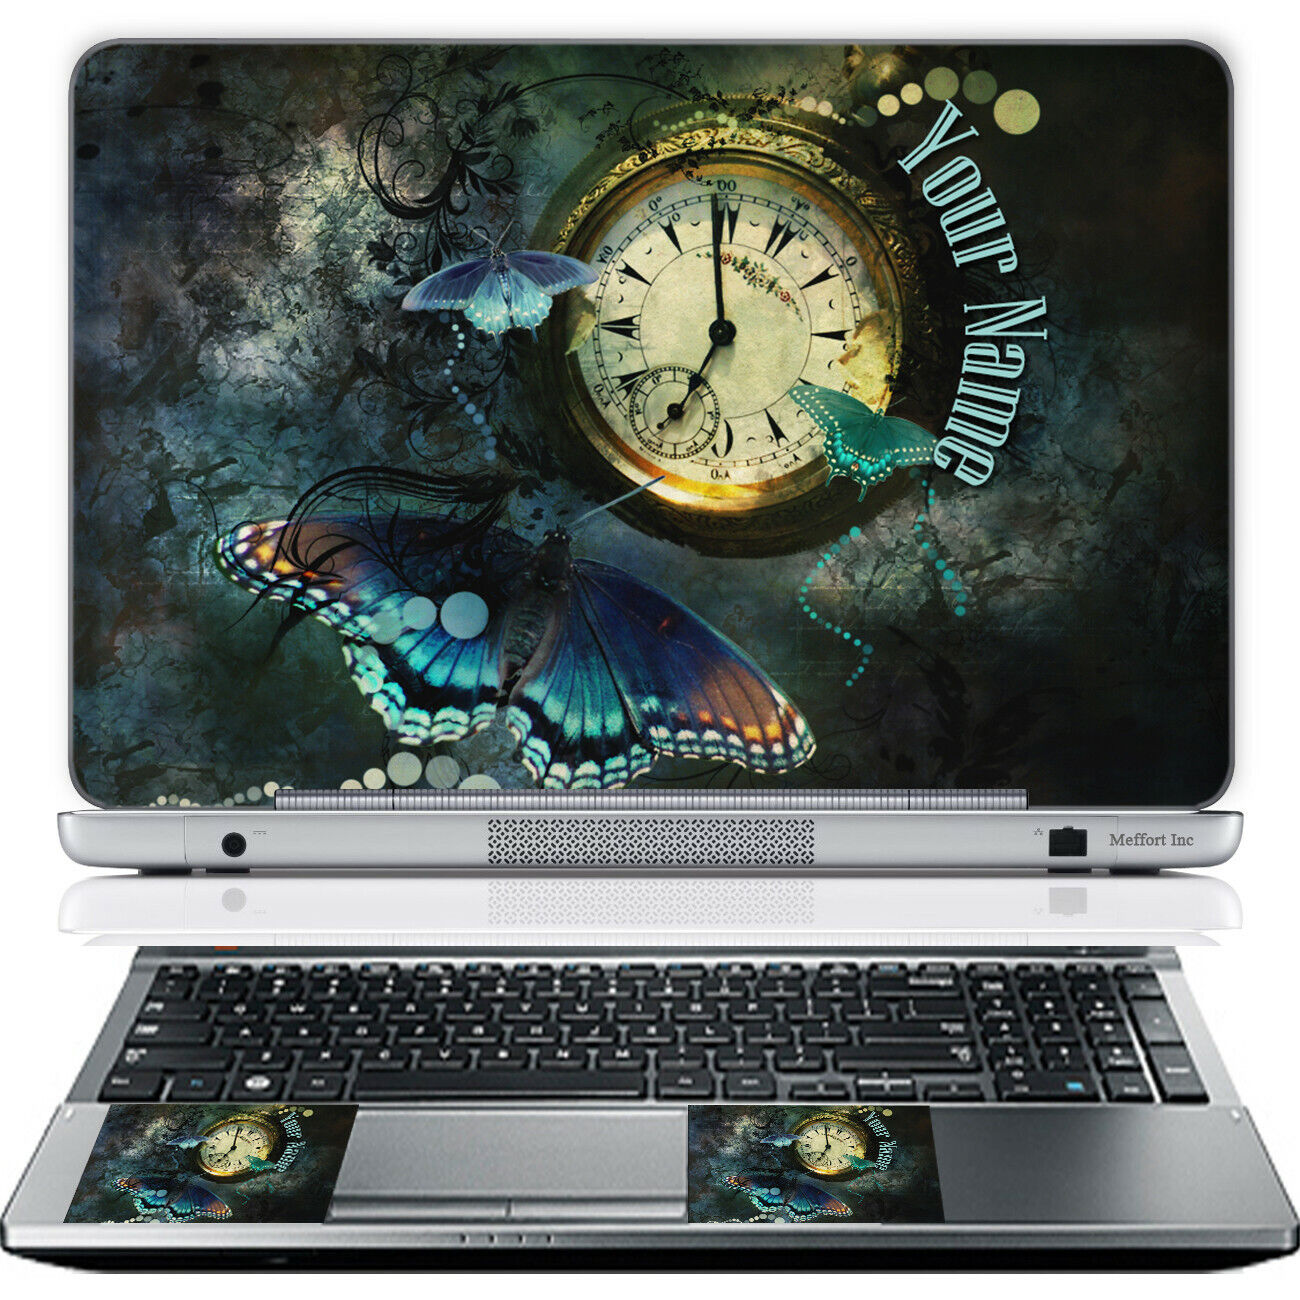 17 Inch Laptop Skin Sticker Cover Art Decal & Wrist Pad Customize Your text